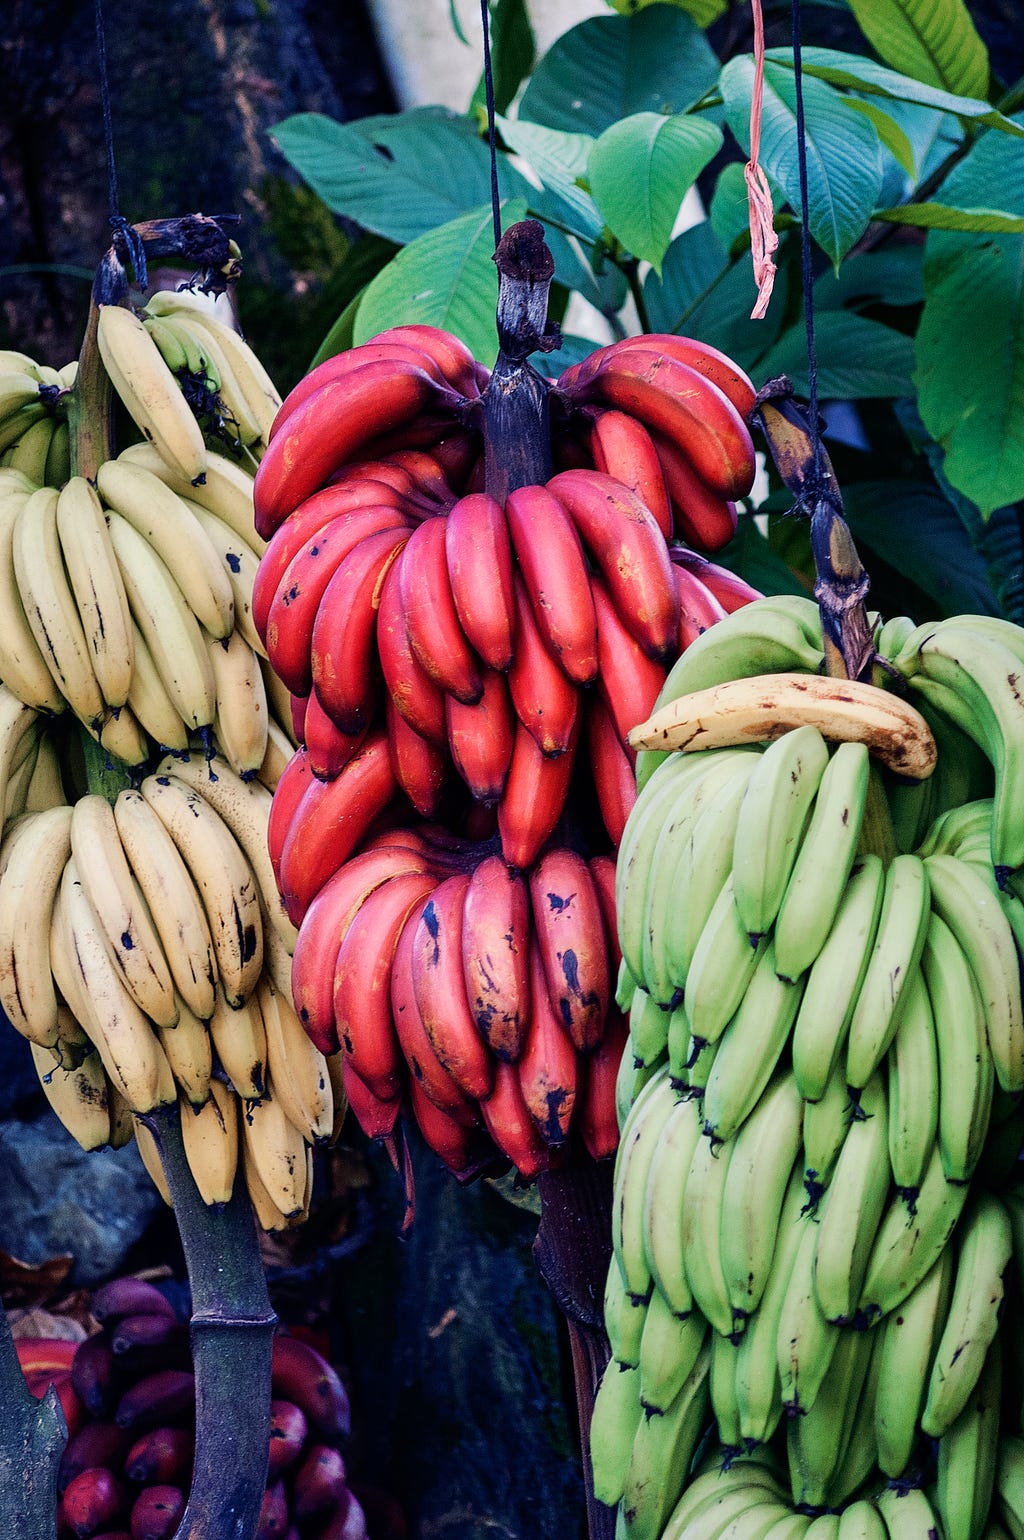 Three hanging multiple bunches of ripe yellow, red and green bananas, against a backdrop of big, green leaves of a plant